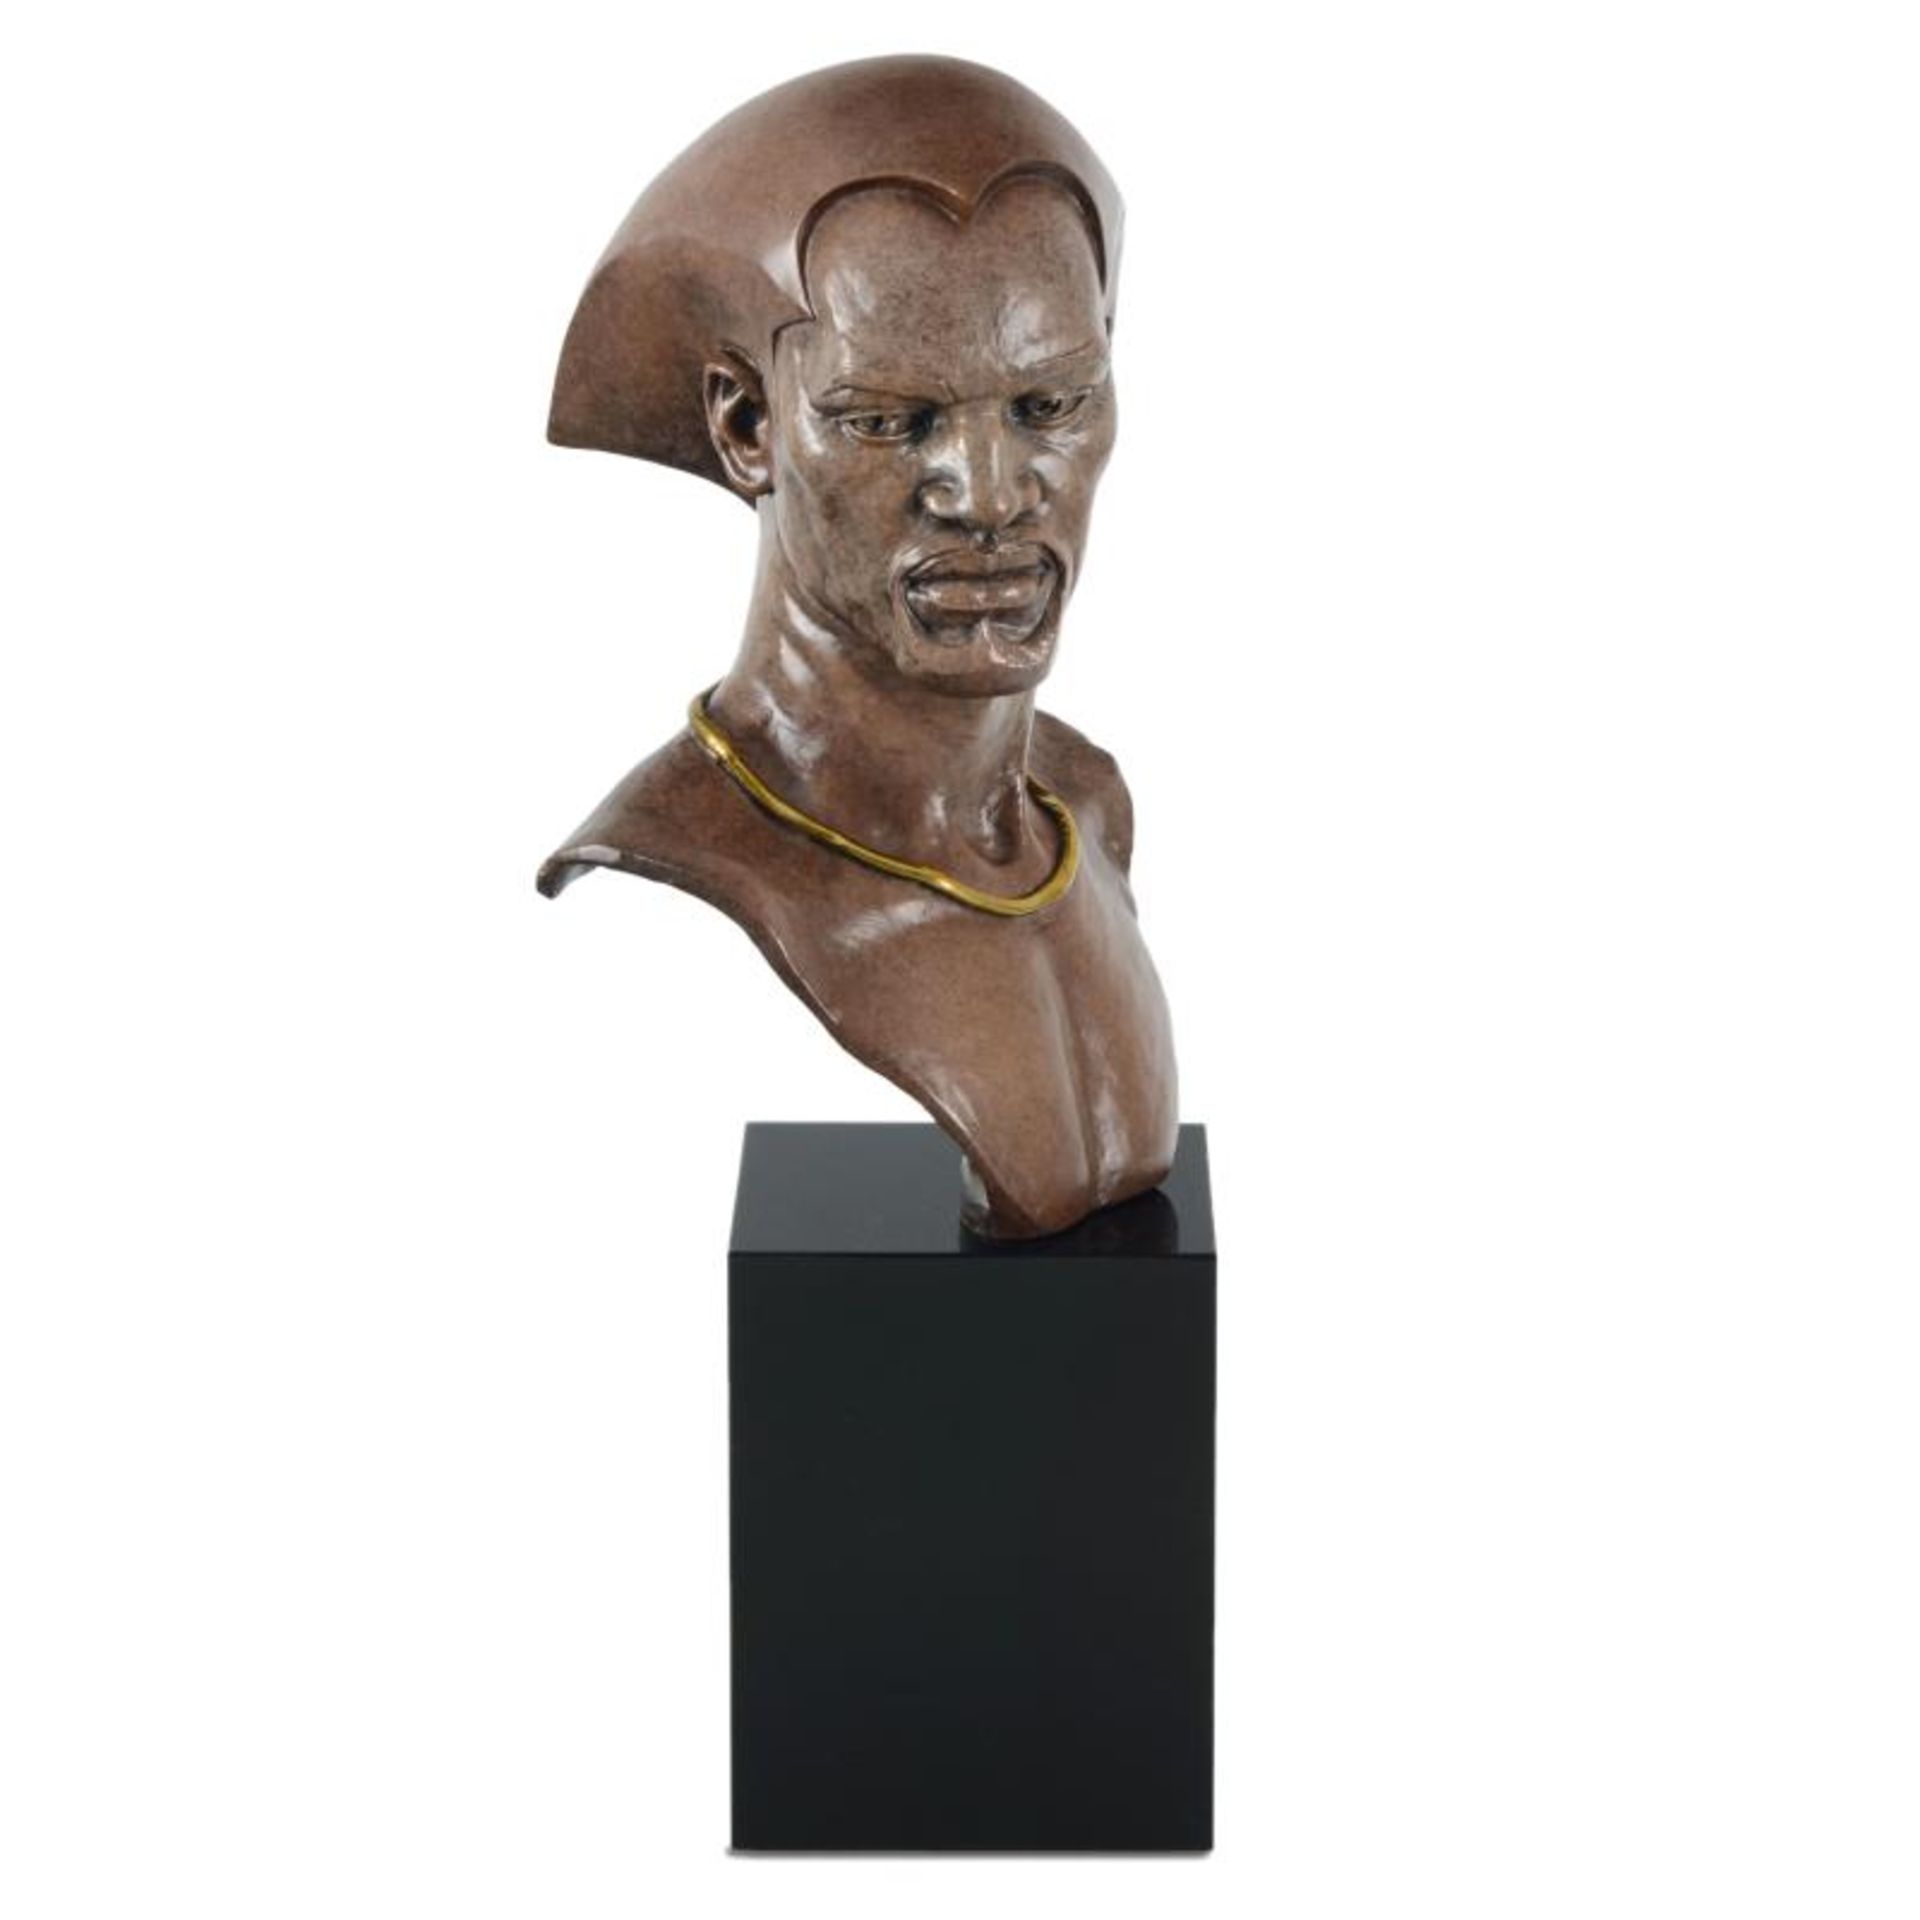 Thomas Blackshear, "Remembering" Limited Edition Mixed Media Sculpture on Marble - Image 3 of 3